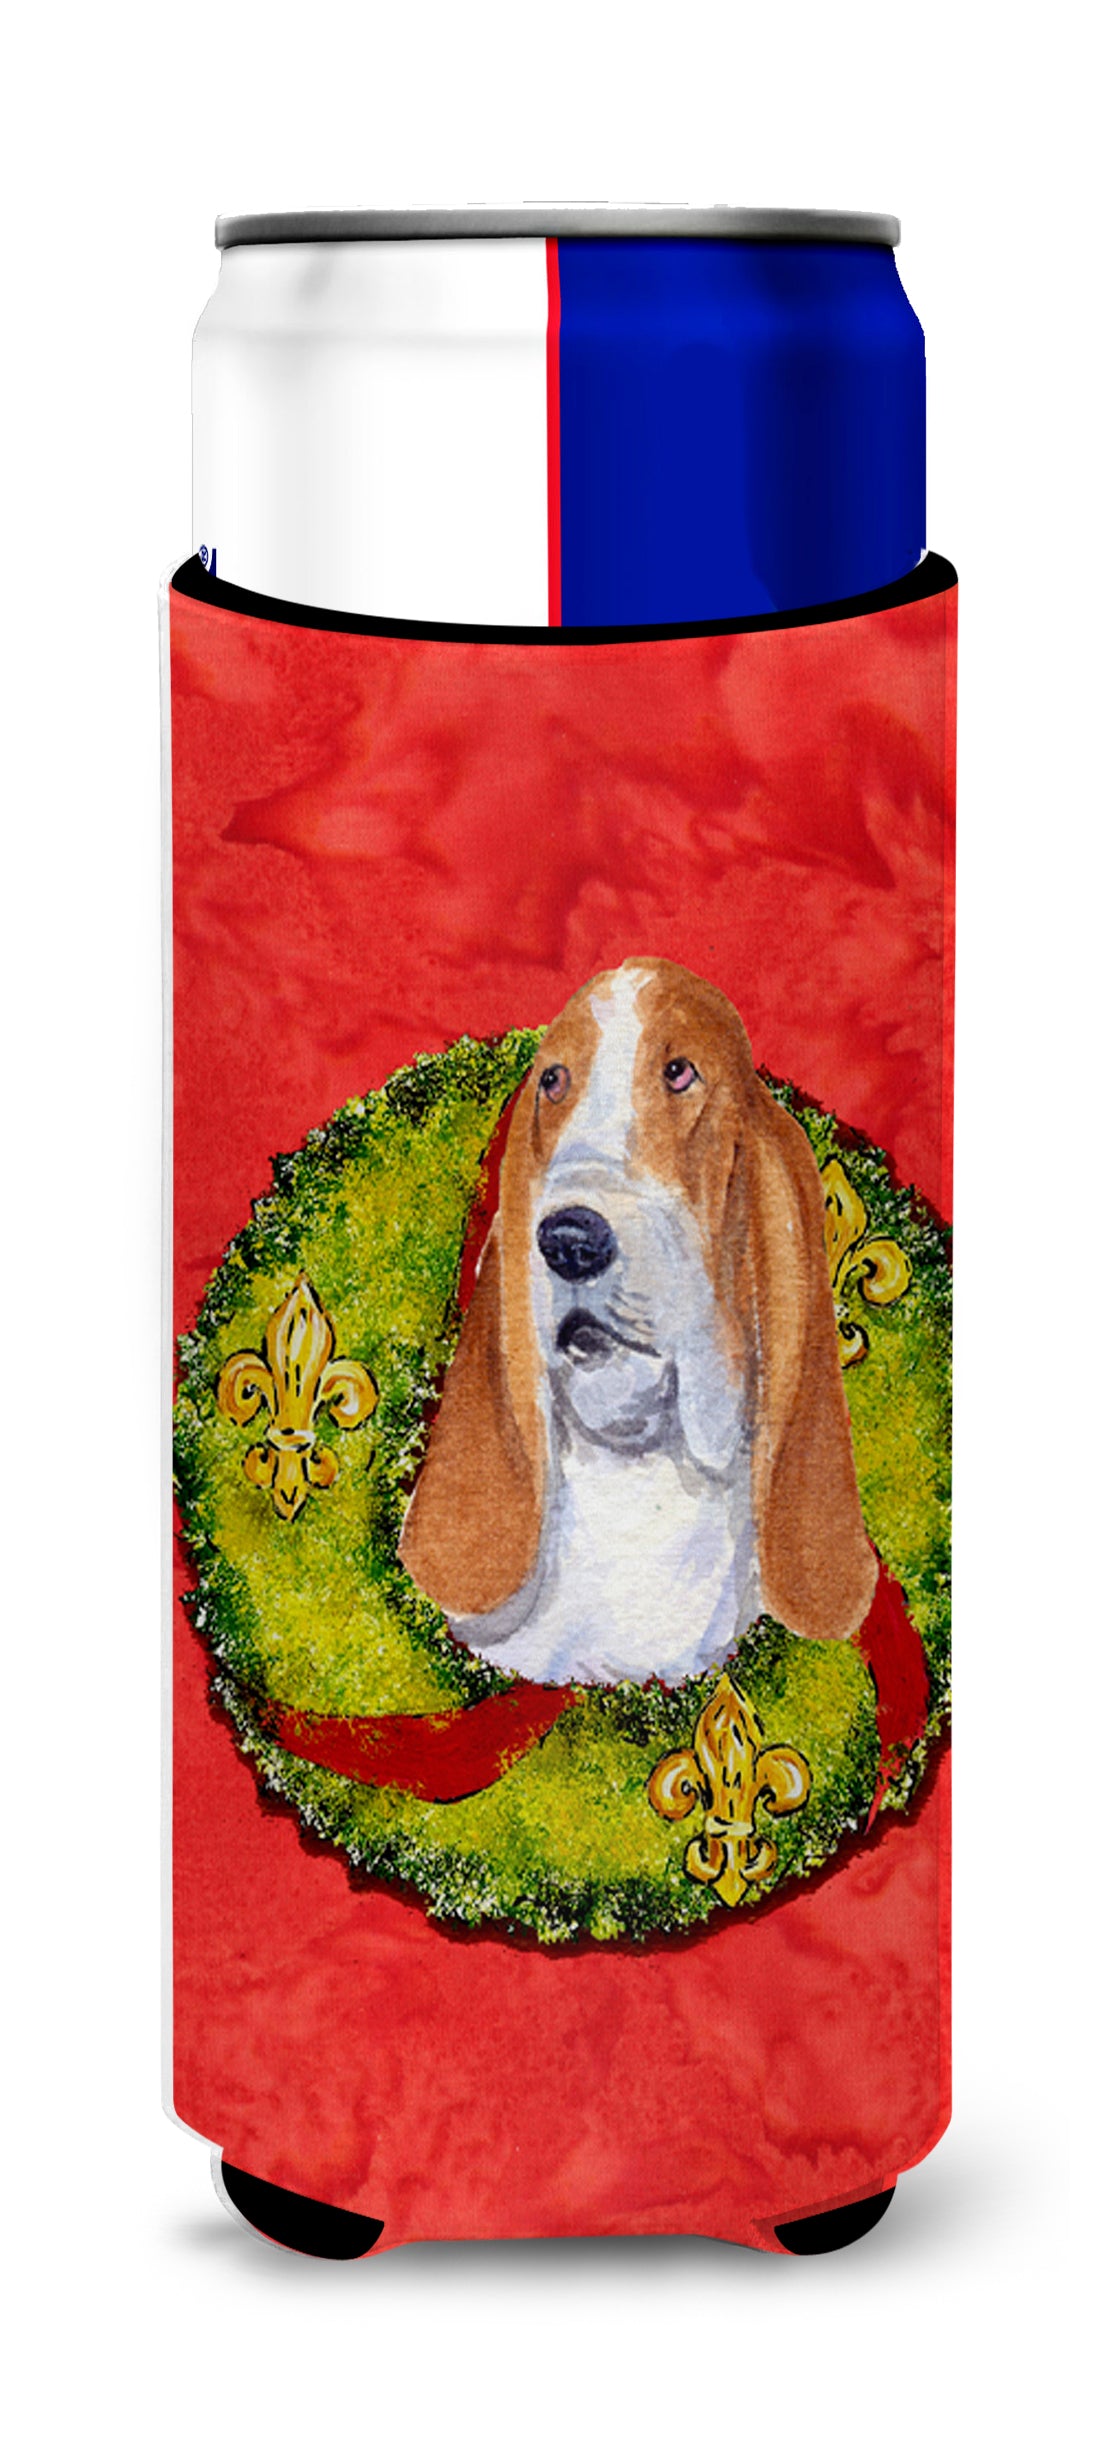 Basset Hound Cristmas Wreath Ultra Beverage Insulators for slim cans SS4215MUK.